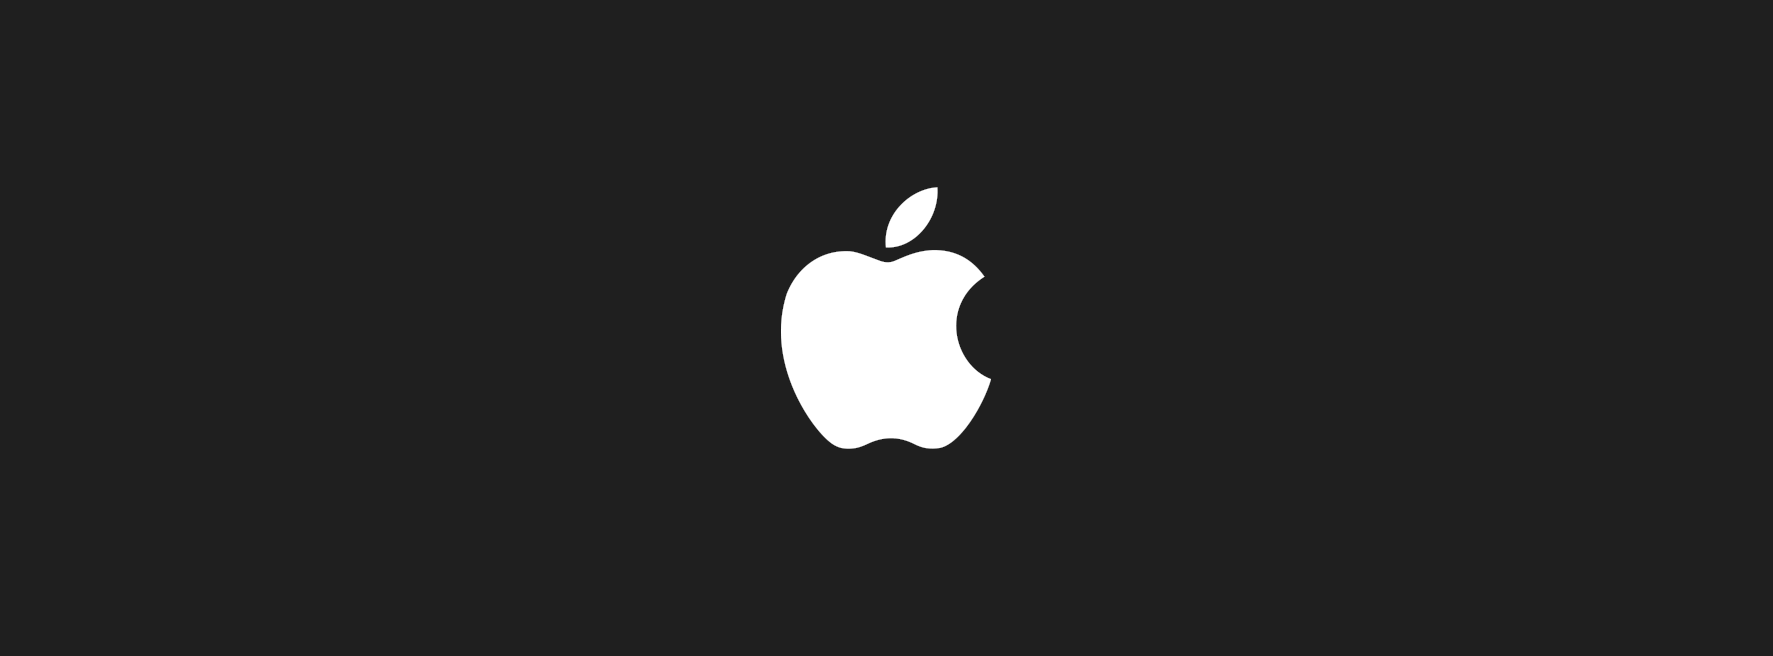 Apple Products | Add-on™ Stores